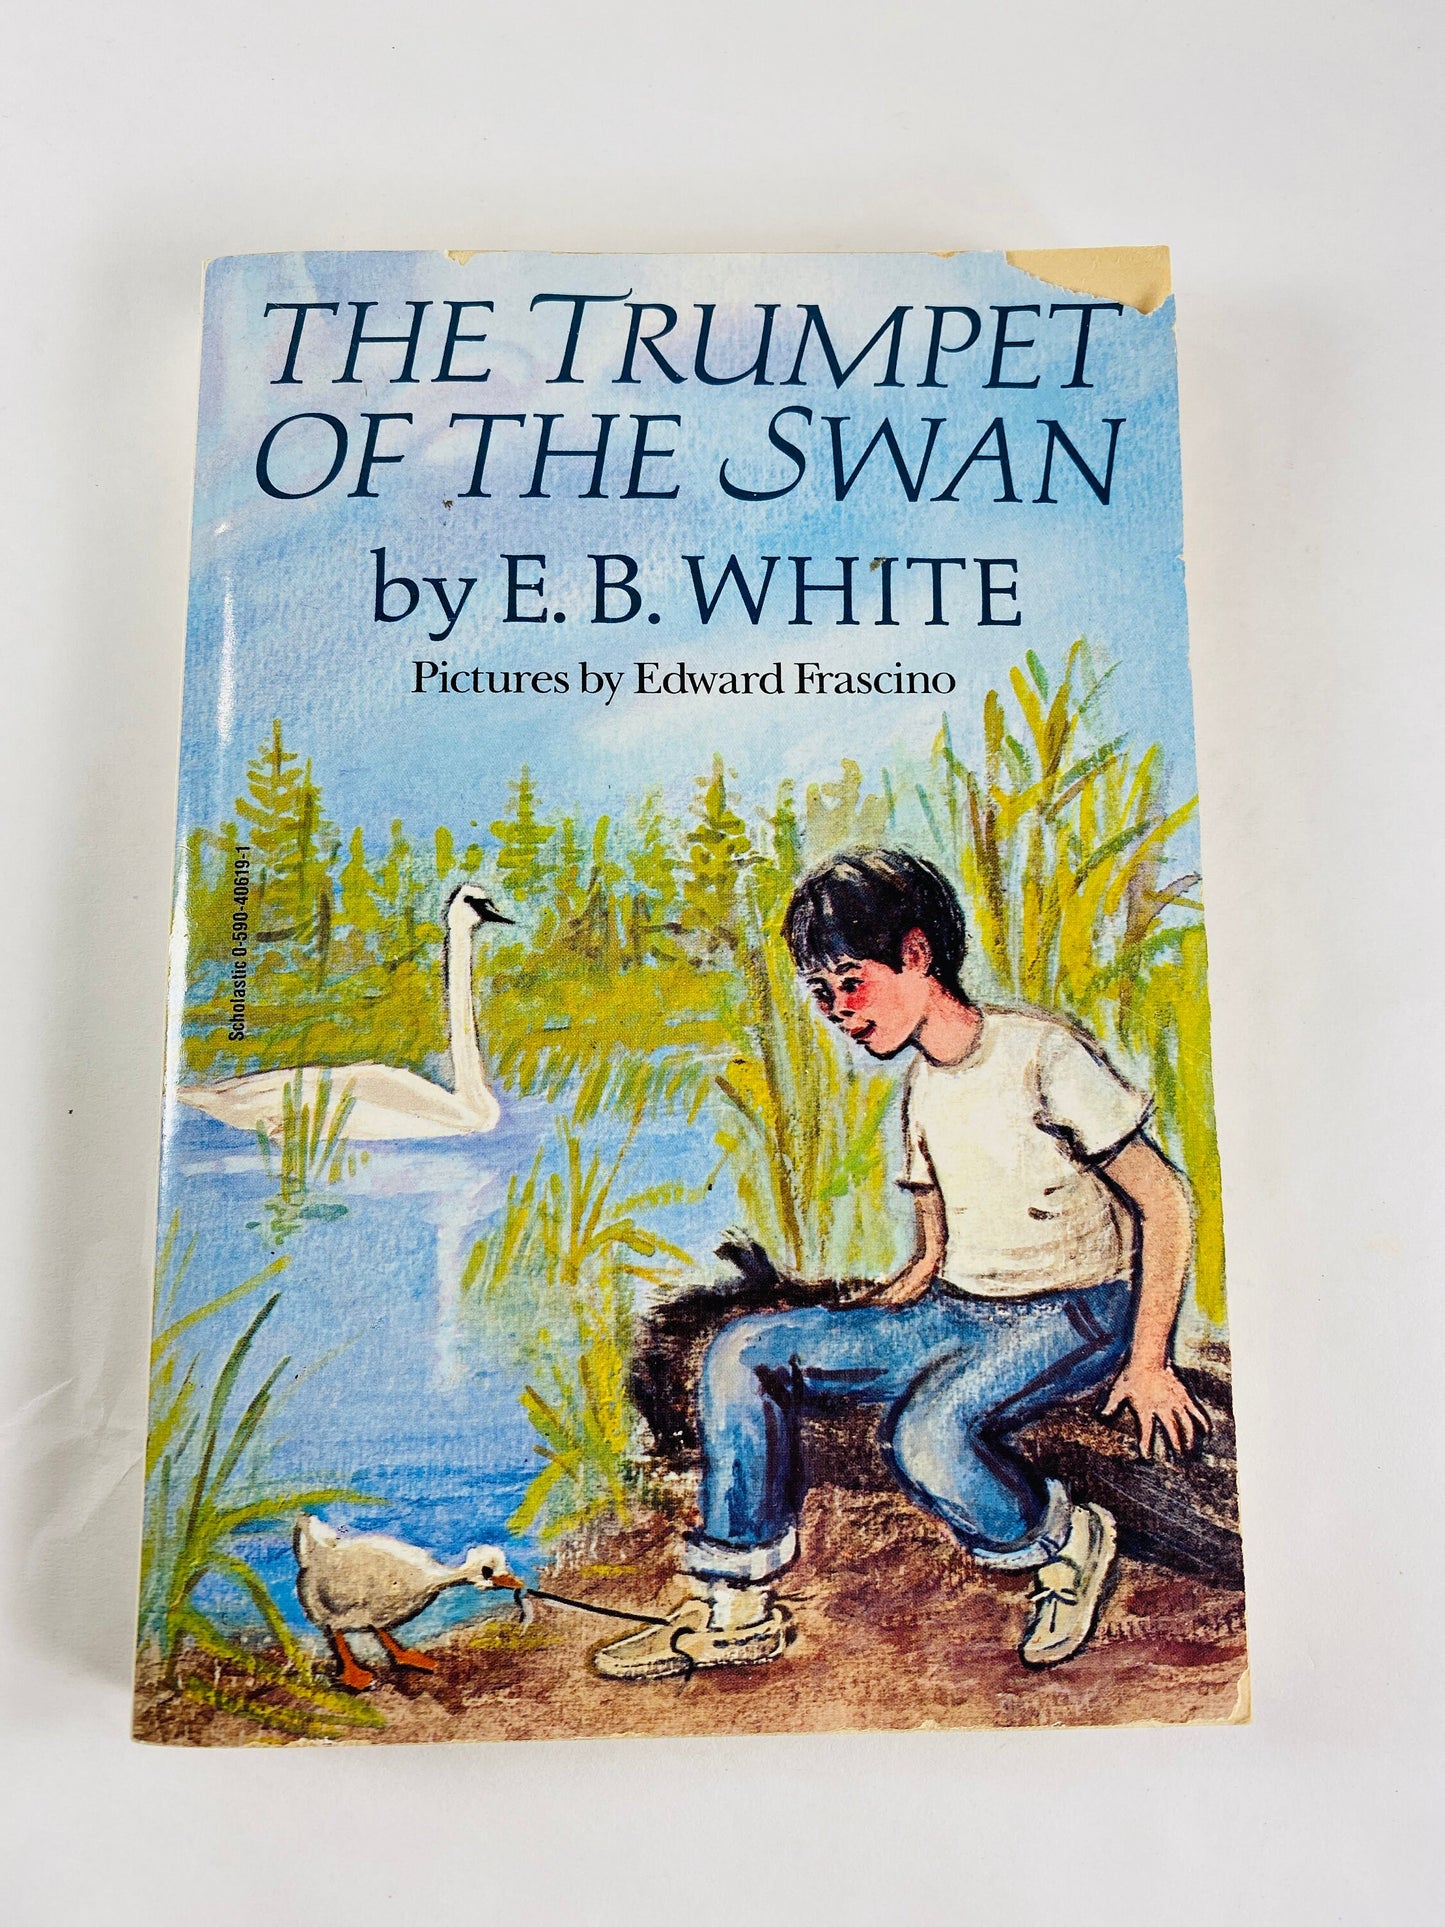 Trumpet of the Swan by EB White vintage paperback book illustrated by Edward Frascino Collector gift by author of Charlotte's Web circa 1987